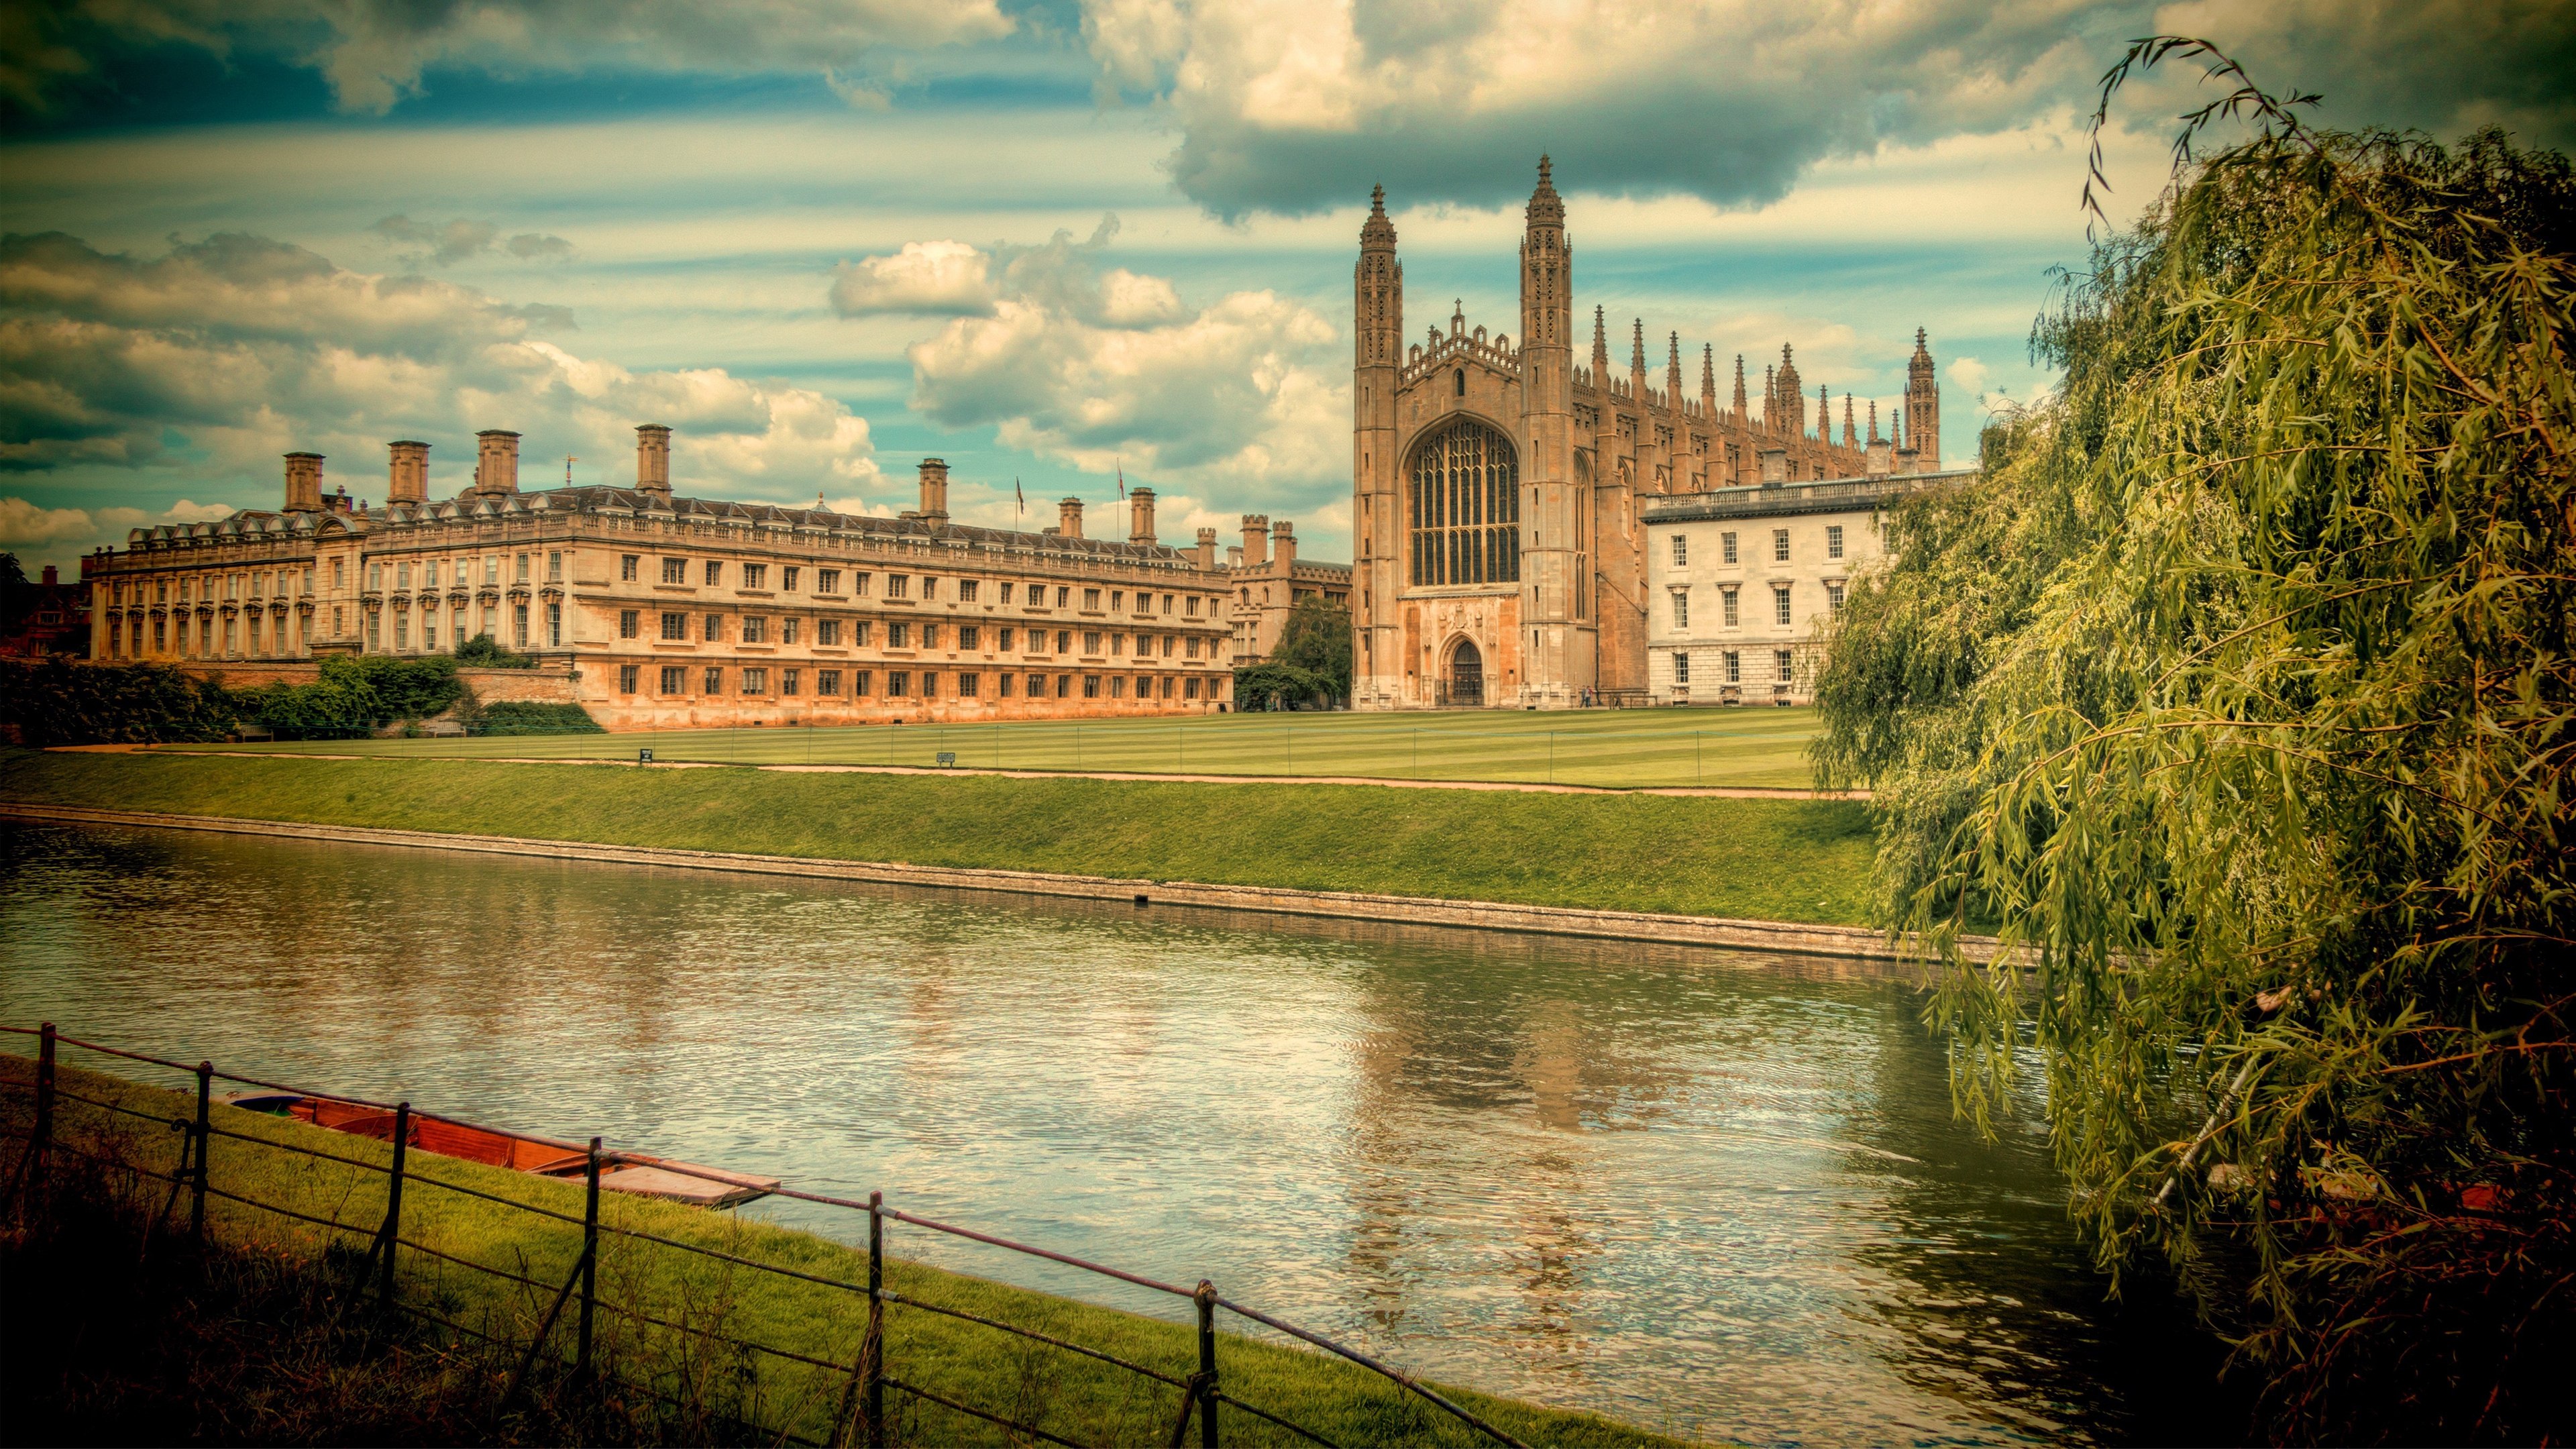 Download free Cambridge University Tourism Wallpaper 99060 available in dif...